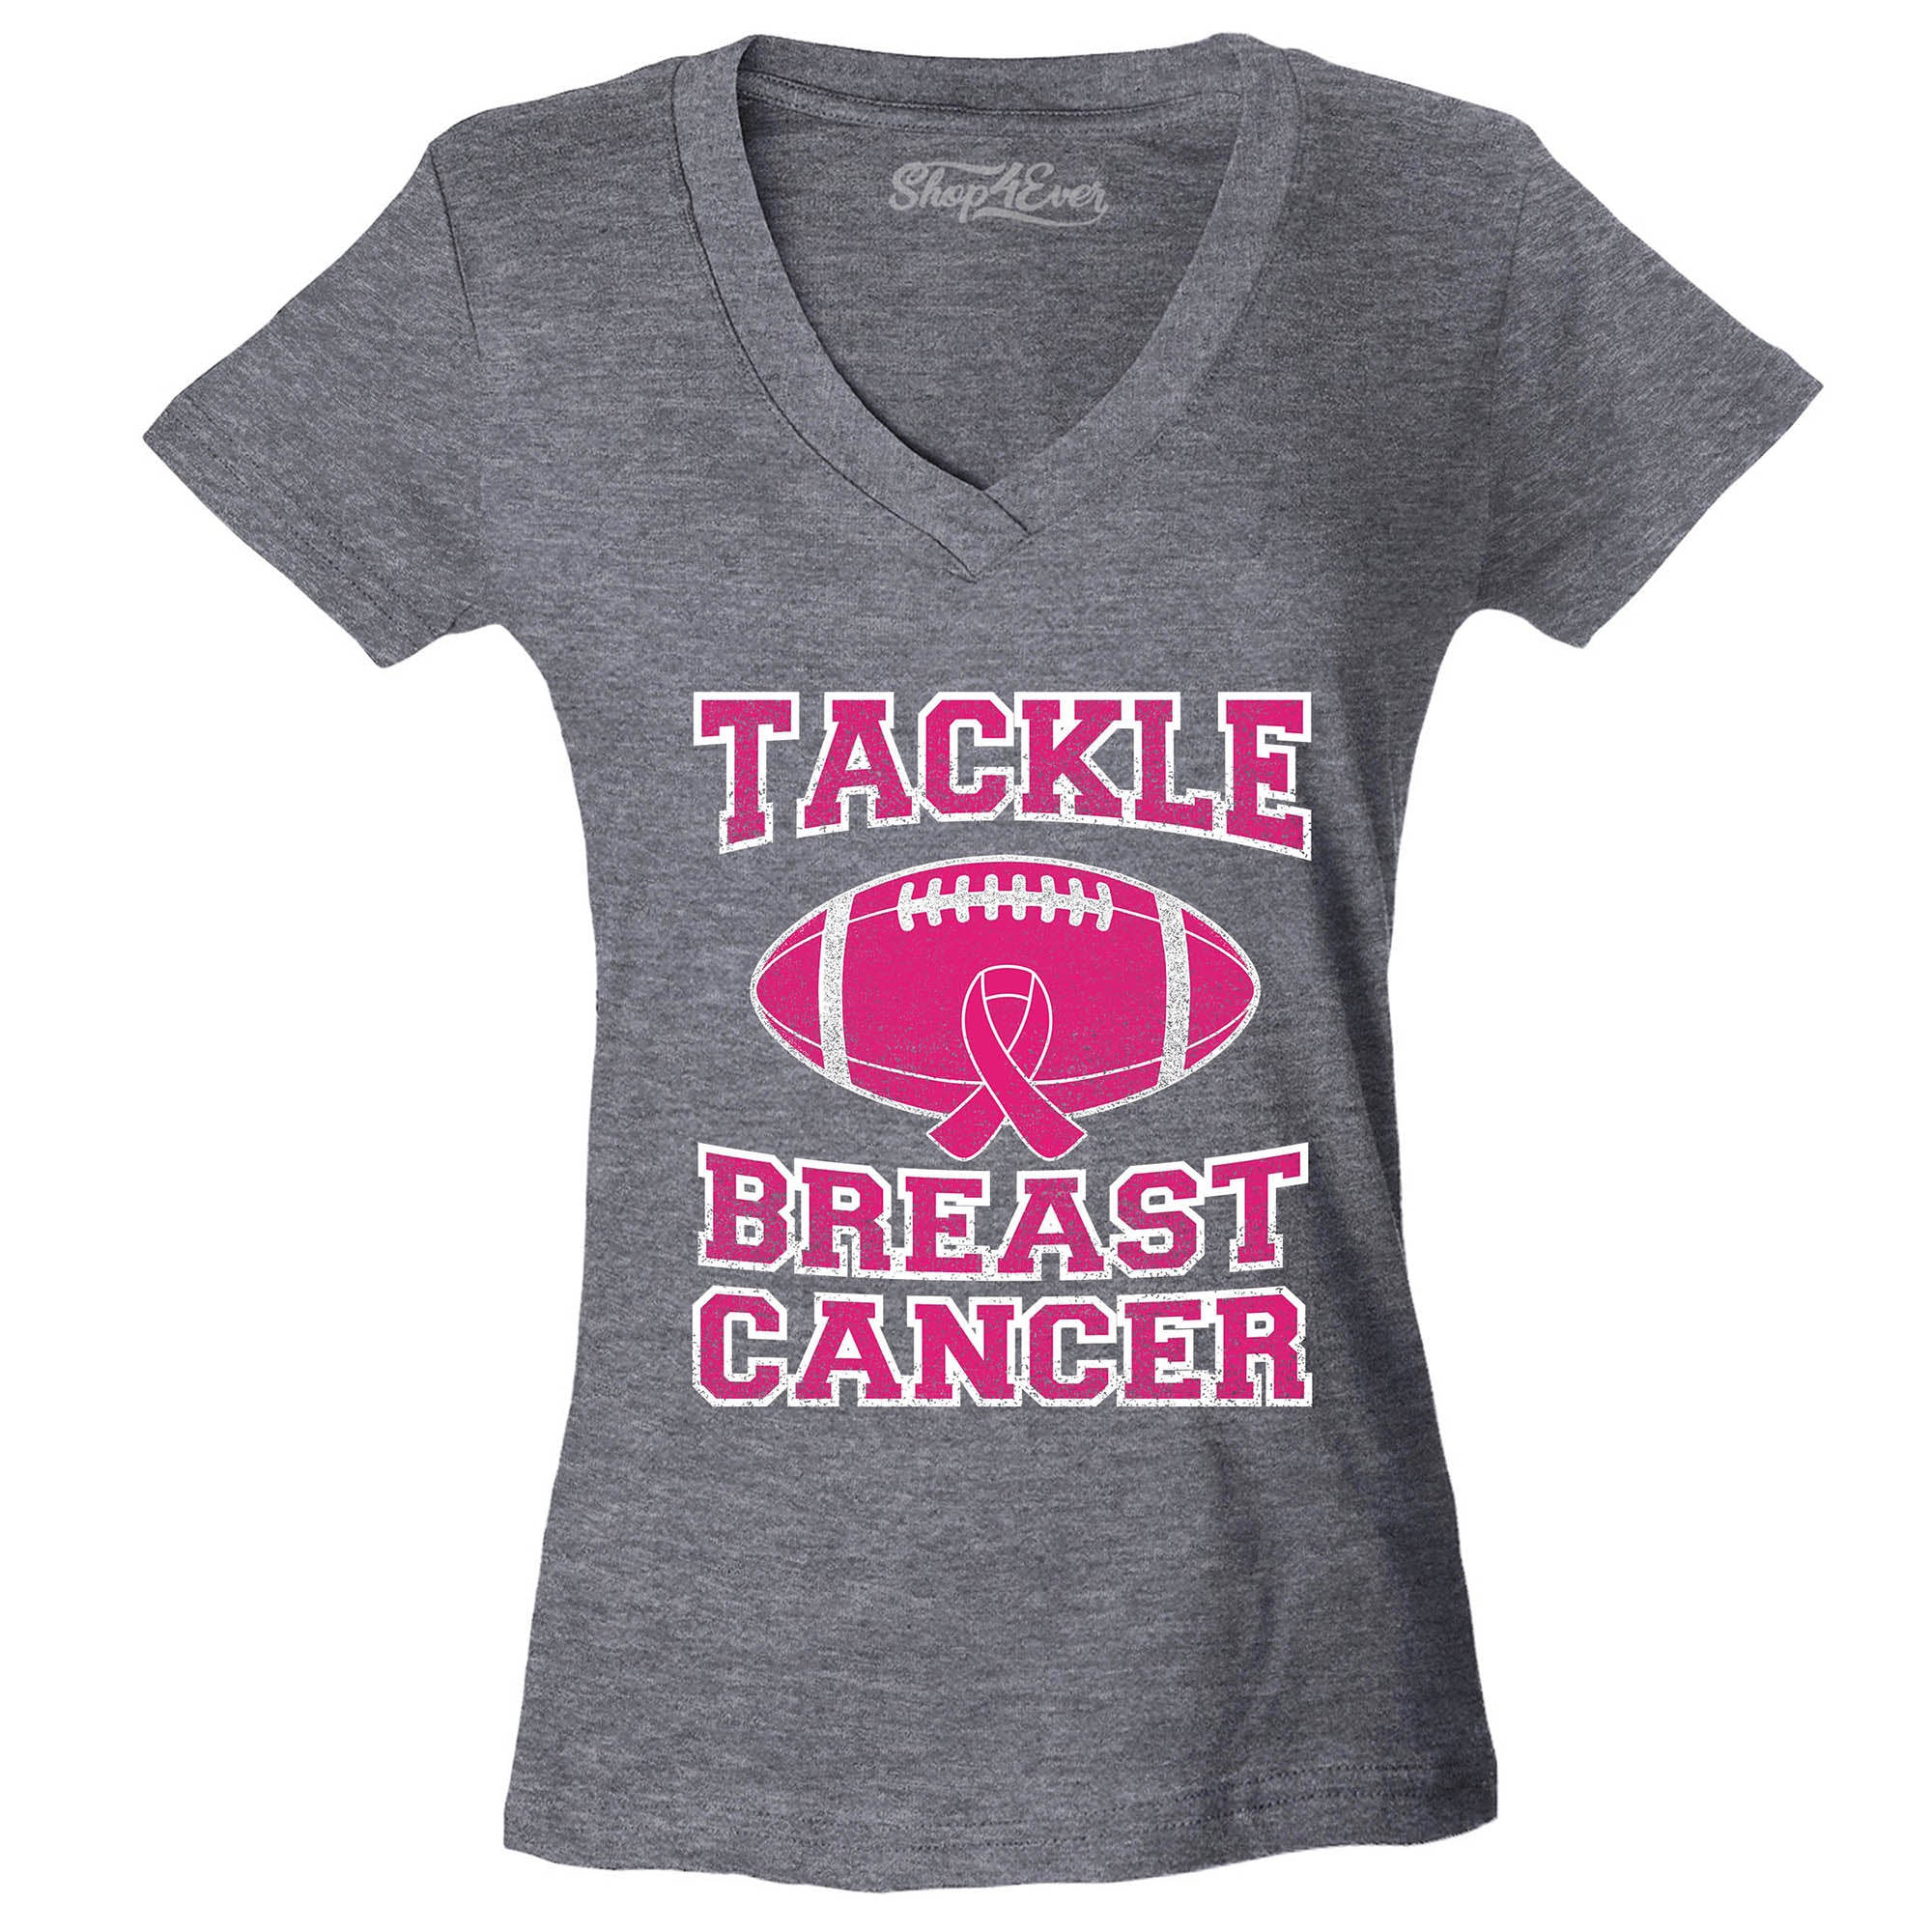 Tackle Breast Cancer Women's V-Neck T-Shirt Support Awareness Shirts Slim FIT